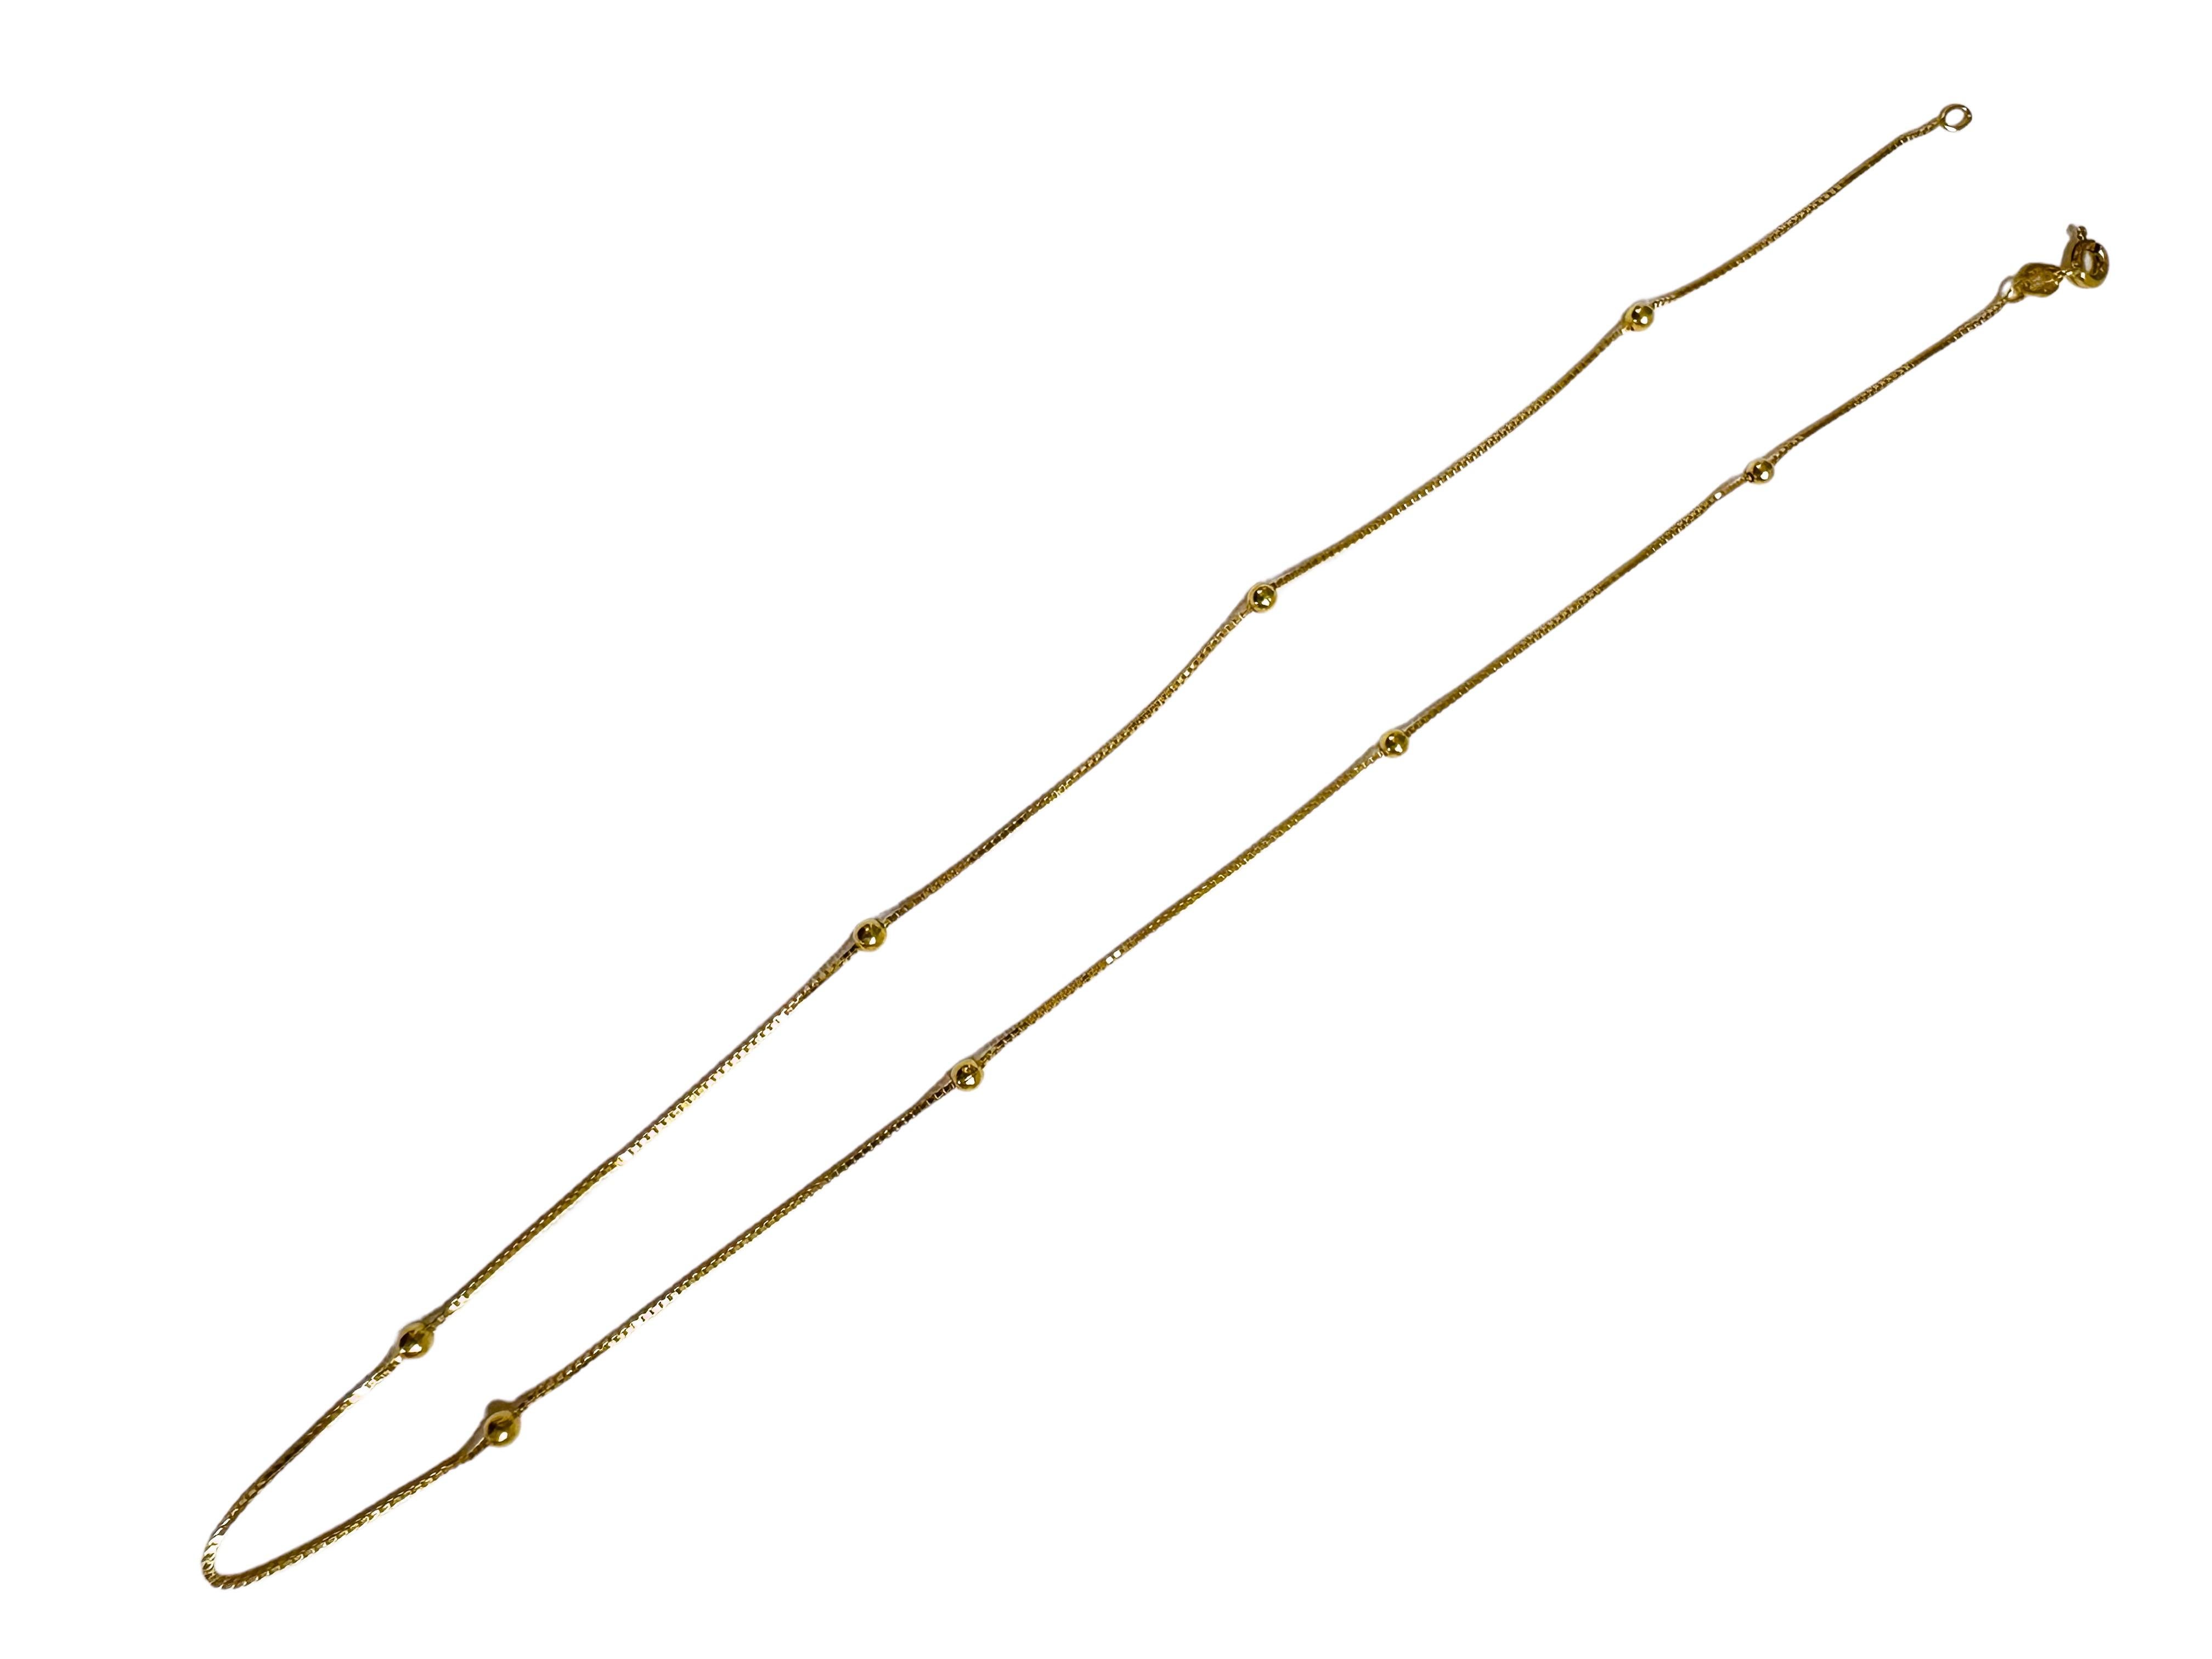 14k Yellow Gold Italian Necklace with Spaced Beads - 16